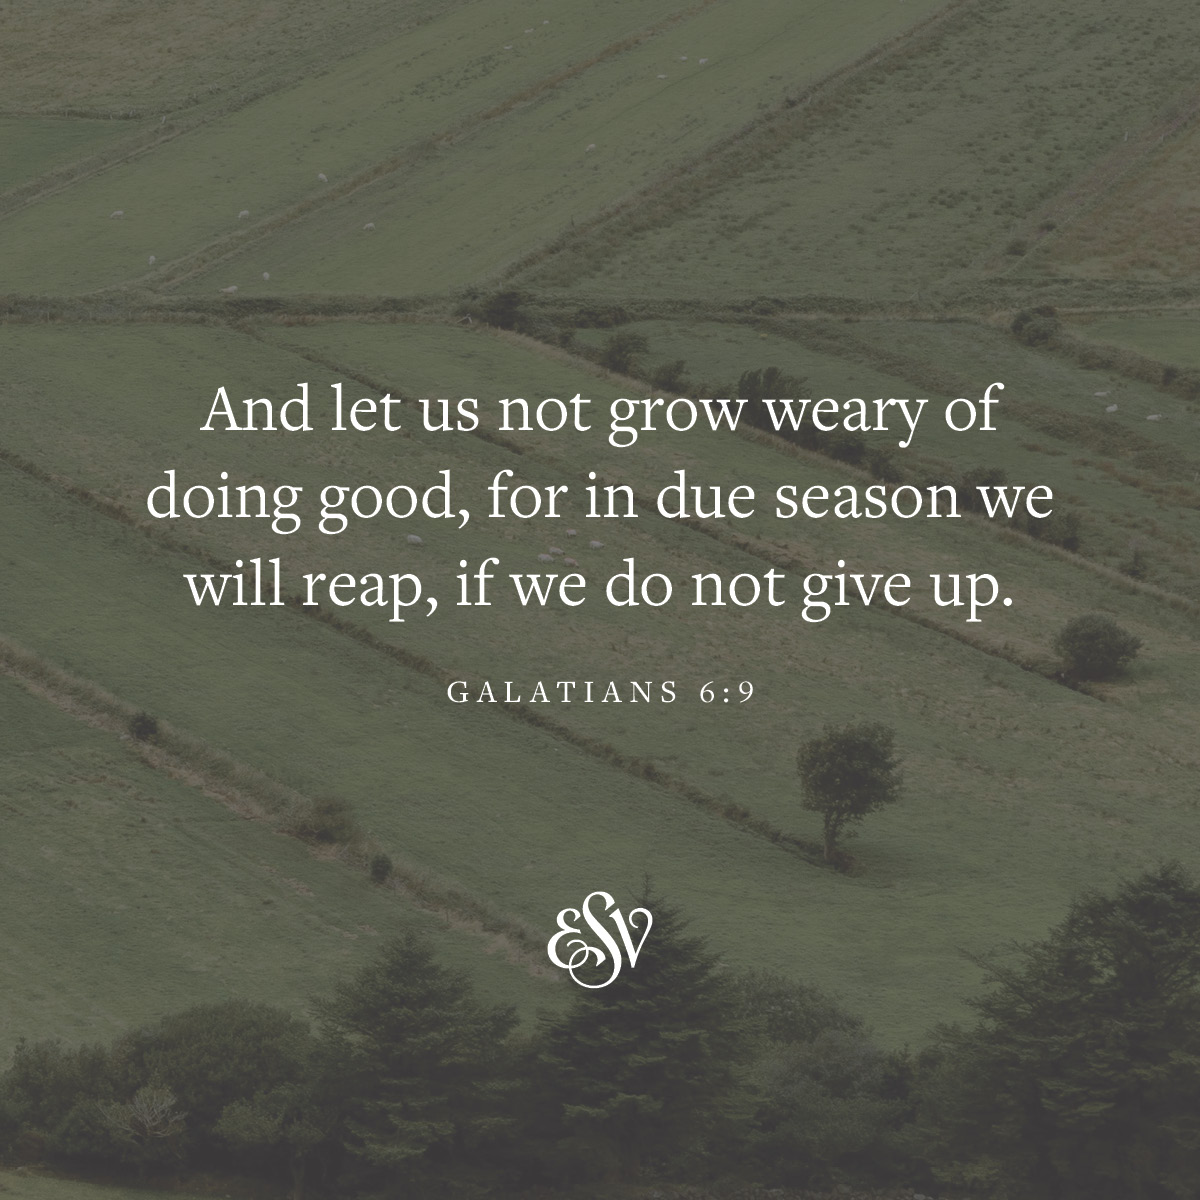 And let us not grow weary of doing good, for in due season we will reap, if we do not give up. —Galatians 6:9 ESV.org 

#Verseoftheday #ESV #Scripturememoryverse #Bible